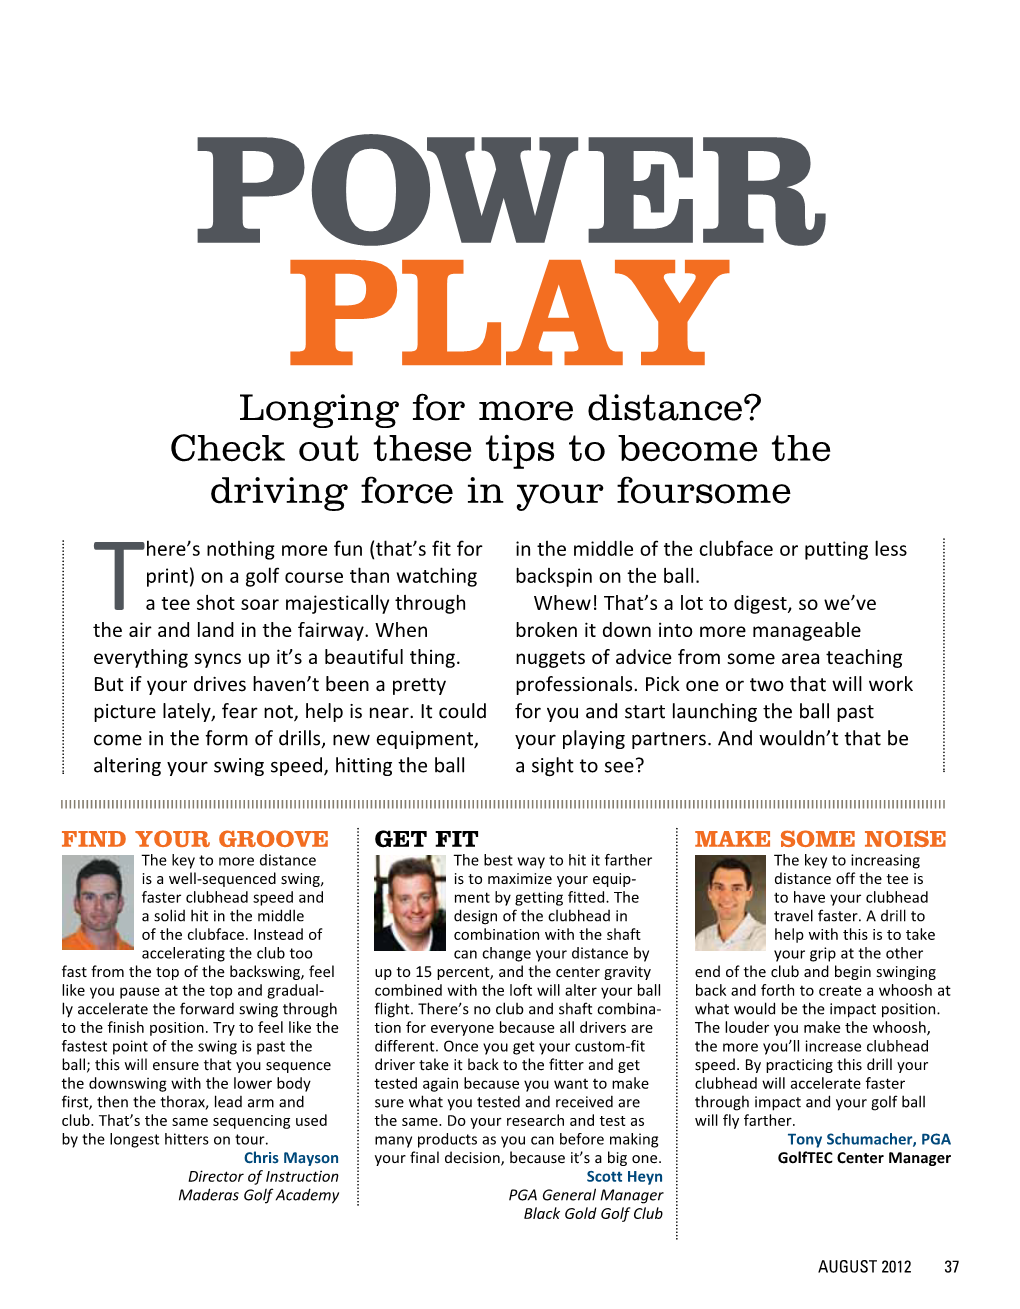 Longing for More Distance? Check out These Tips to Become the Driving Force in Your Foursome